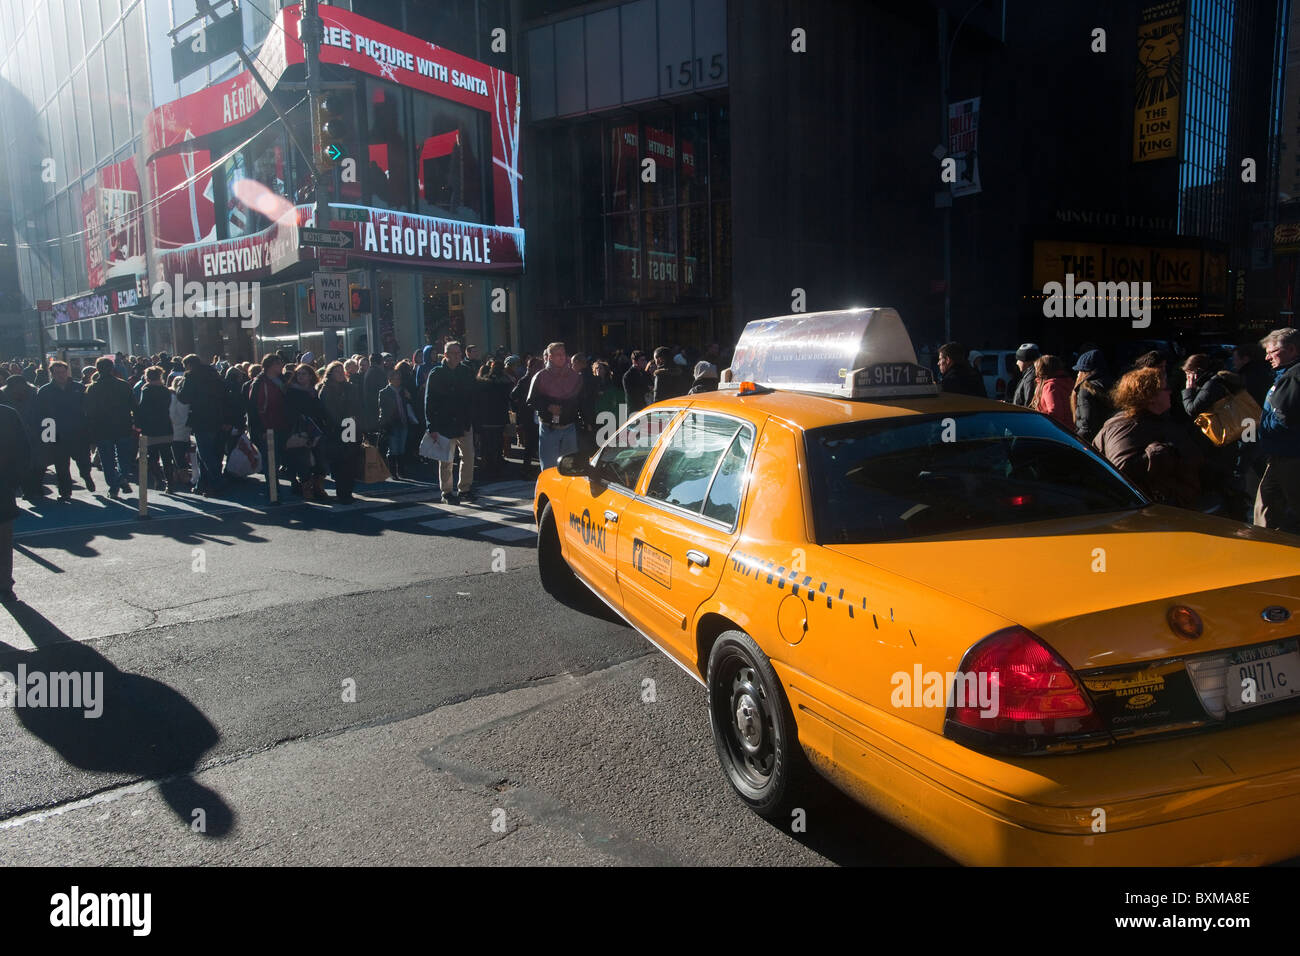 A taxi attempts to turn while a mass of pedestrians maneuvers through the crowded sidewalks and streets in Times Square in NY Stock Photo